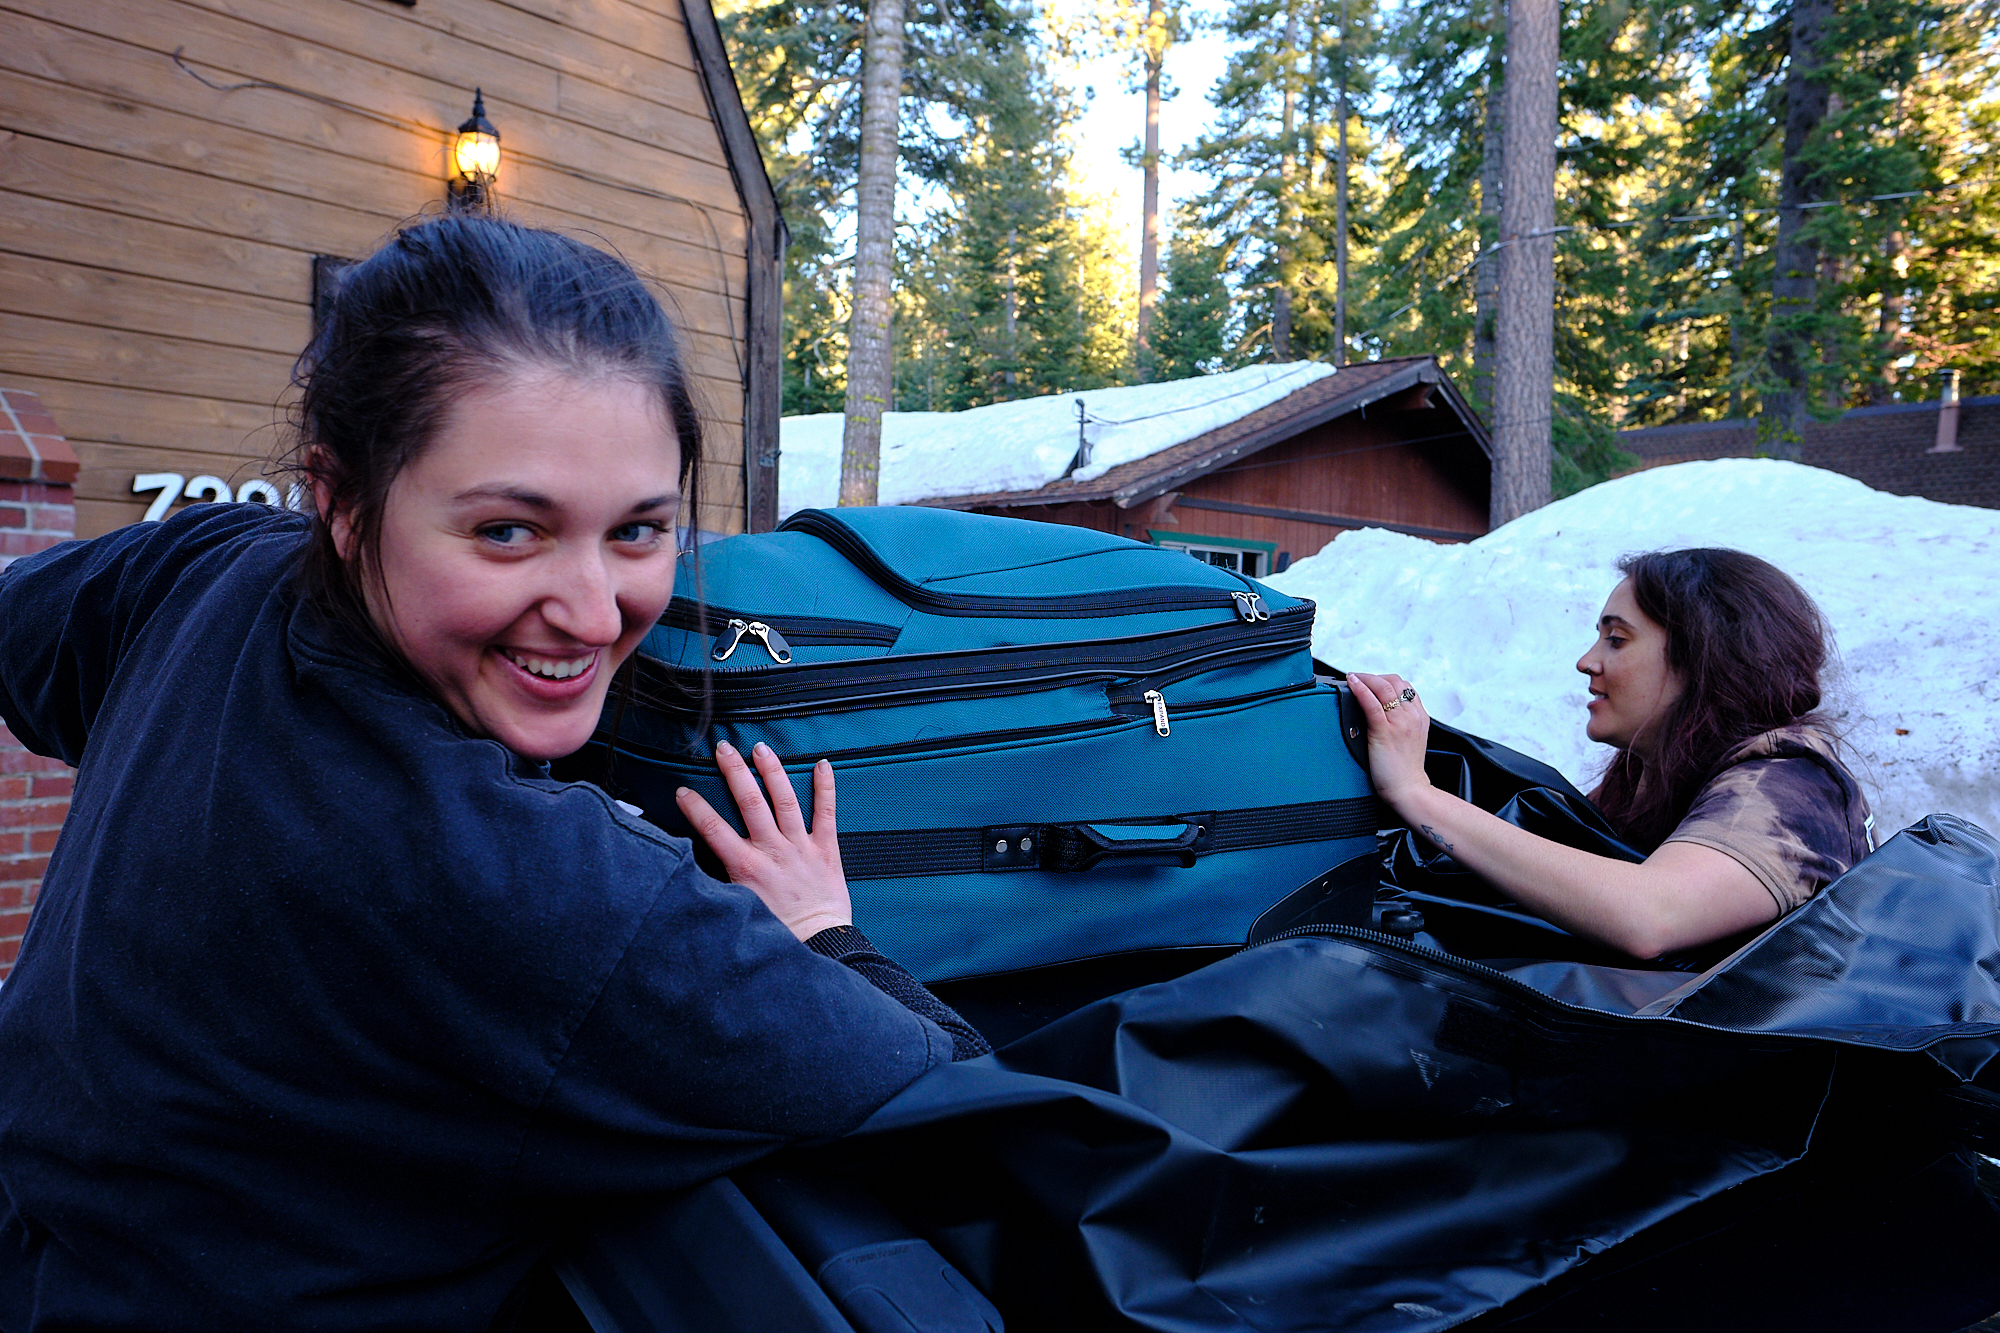  Sierra and Nicole pack up the car for their roadtrip back east. | Tahoma, CA 4/12/19 